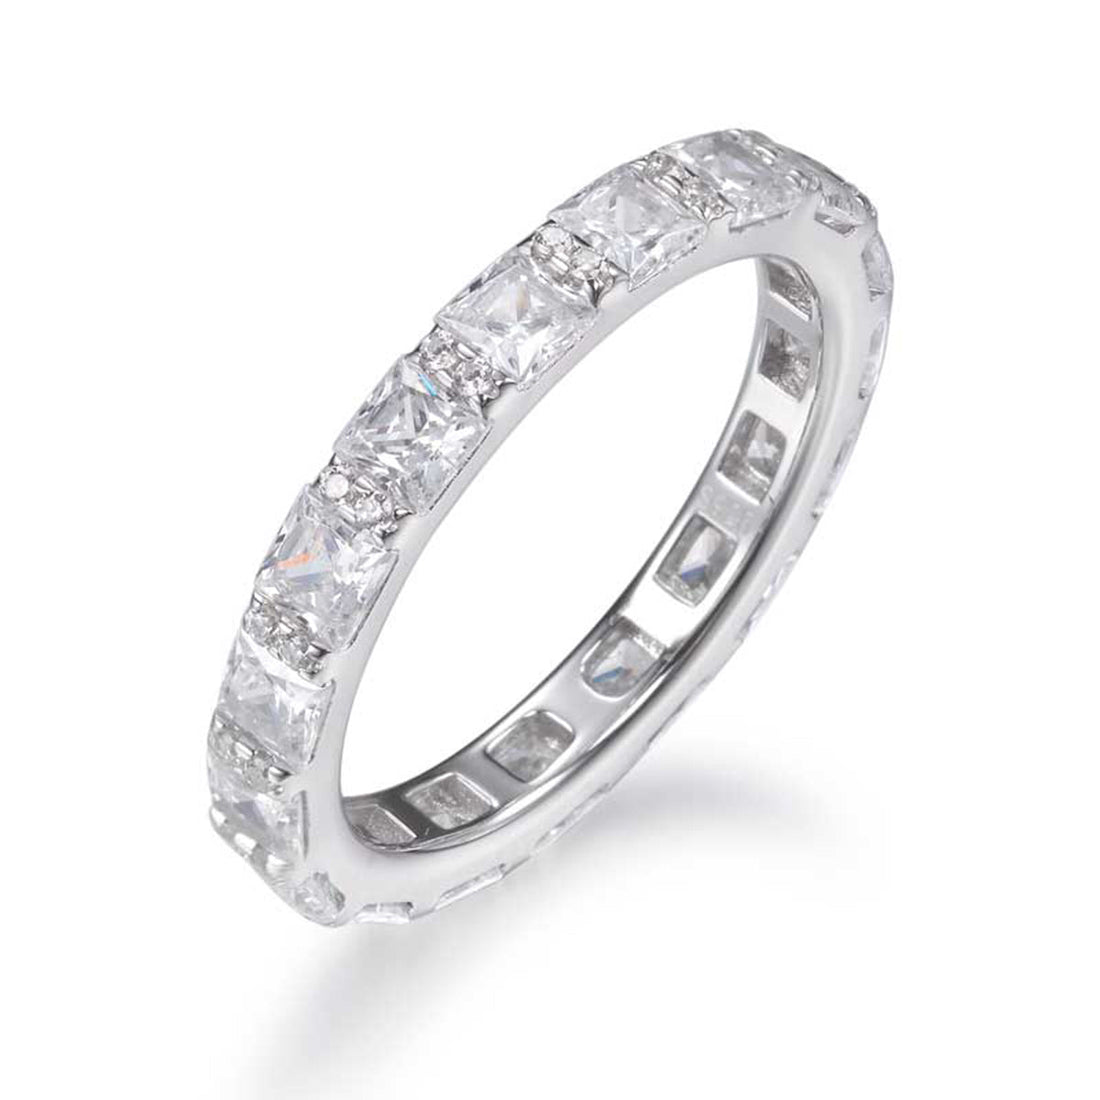 3.80ct Princess Cut Cubic Zirconia Full Eternity Ring in Rhodium Plated Silver